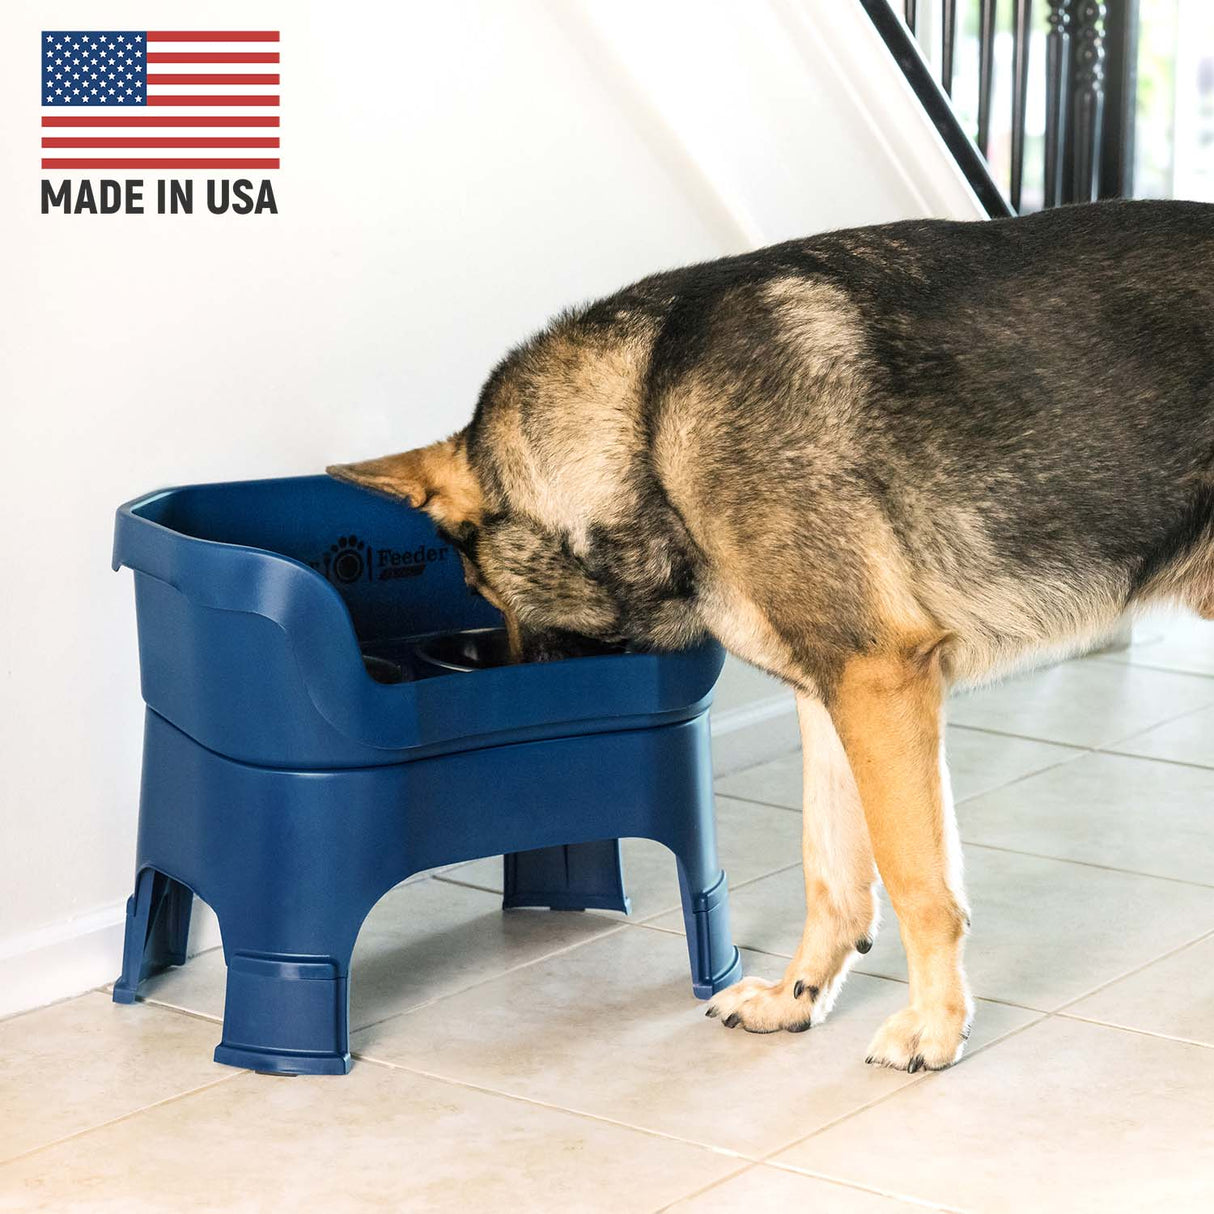 German Shepherd eating from Dark Blue Neater Feeder Deluxe - Made in the USA